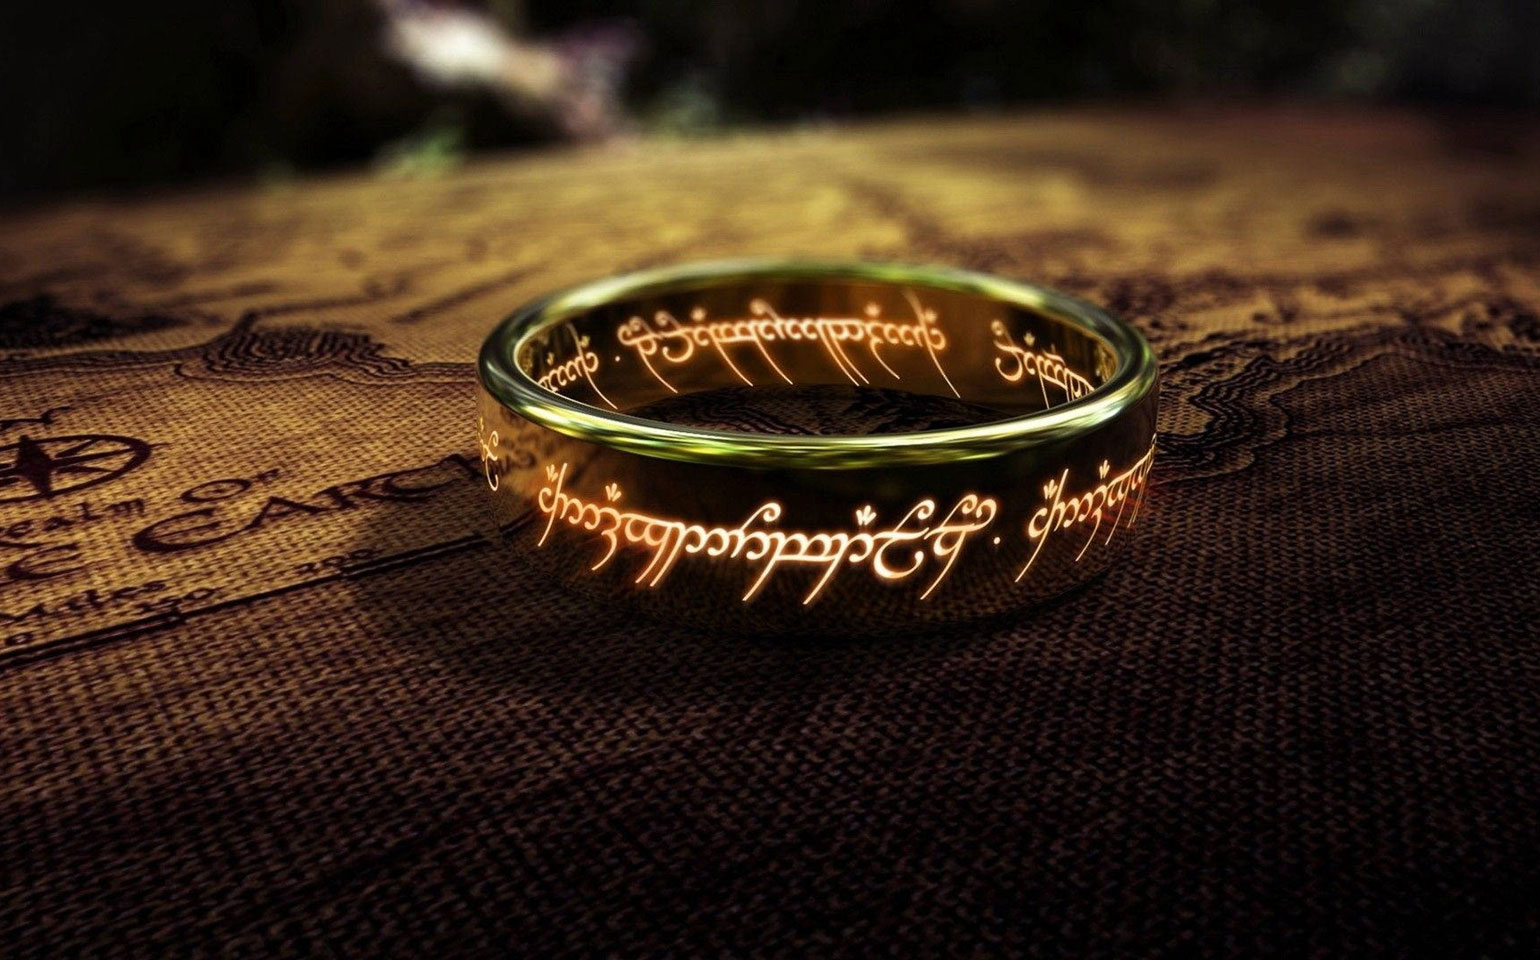 A ring from The Lord of the Rings glows to highlight an encryption.